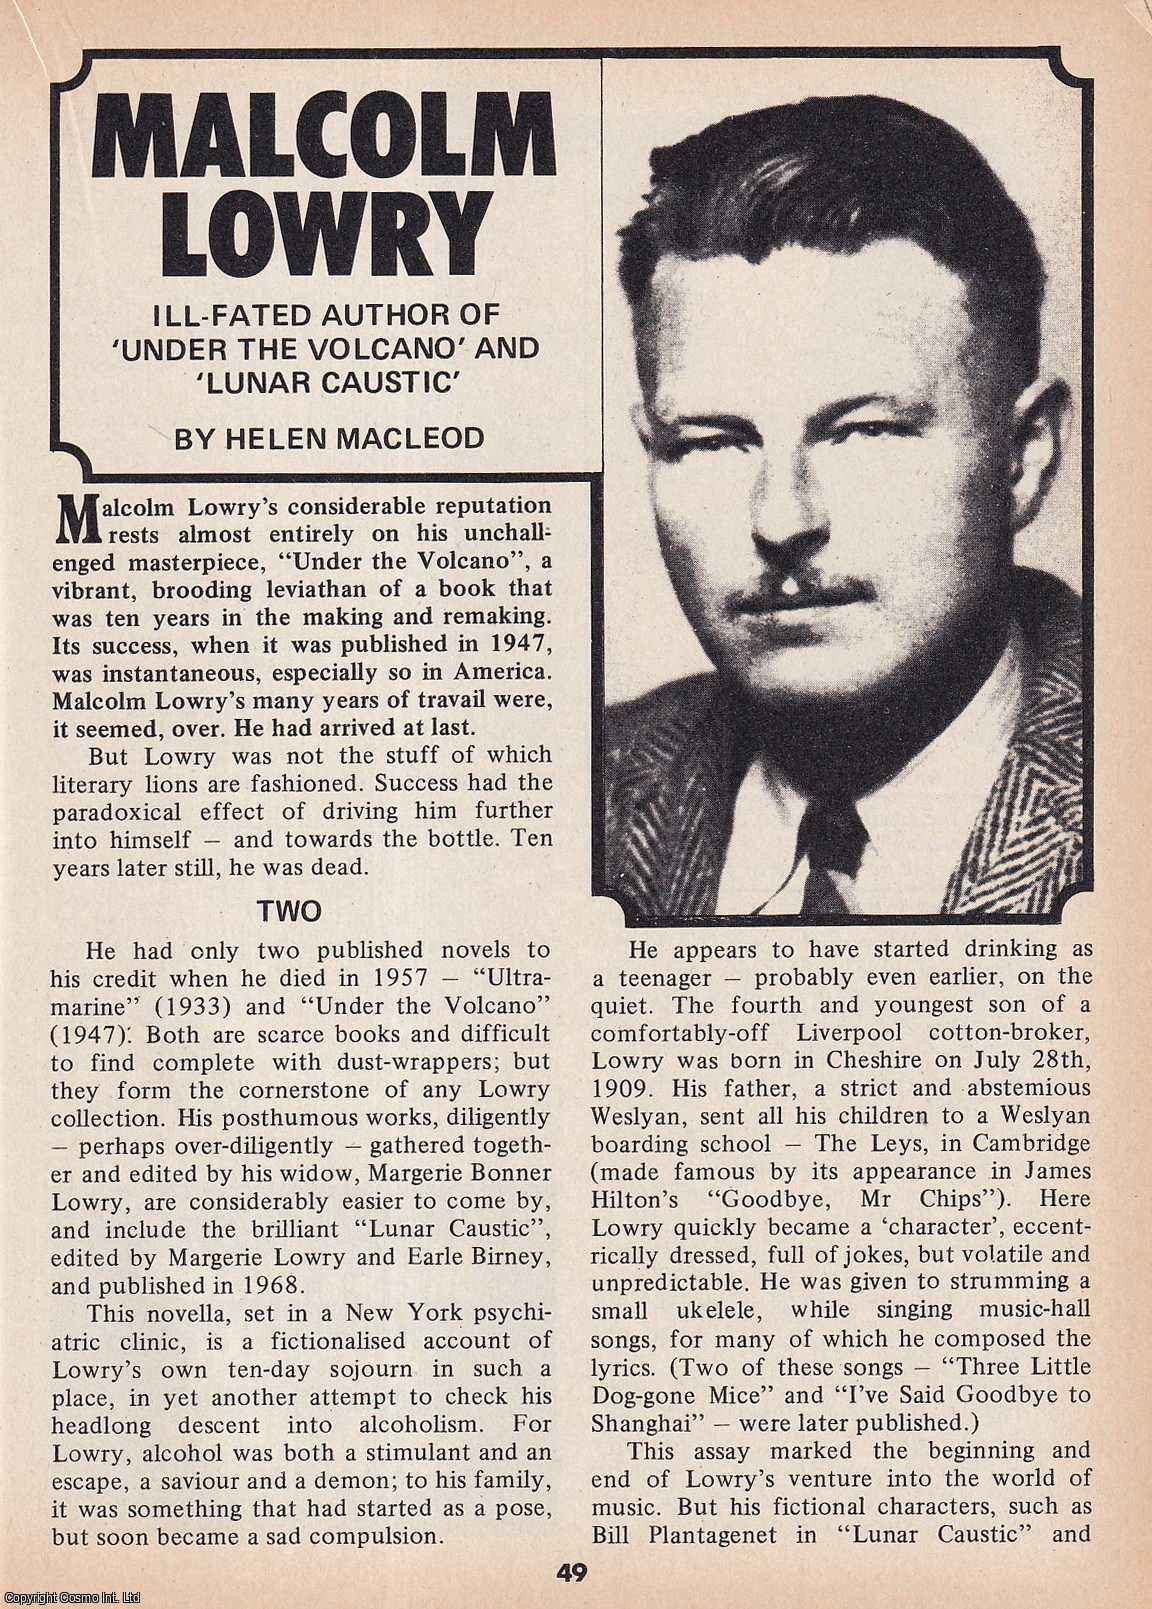 Helen Macleod - Malcolm Lowry : Ill-Fated Author of Under The Volcano & Lunar Caustic. This is an original article separated from an issue of The Book & Magazine Collector publication.